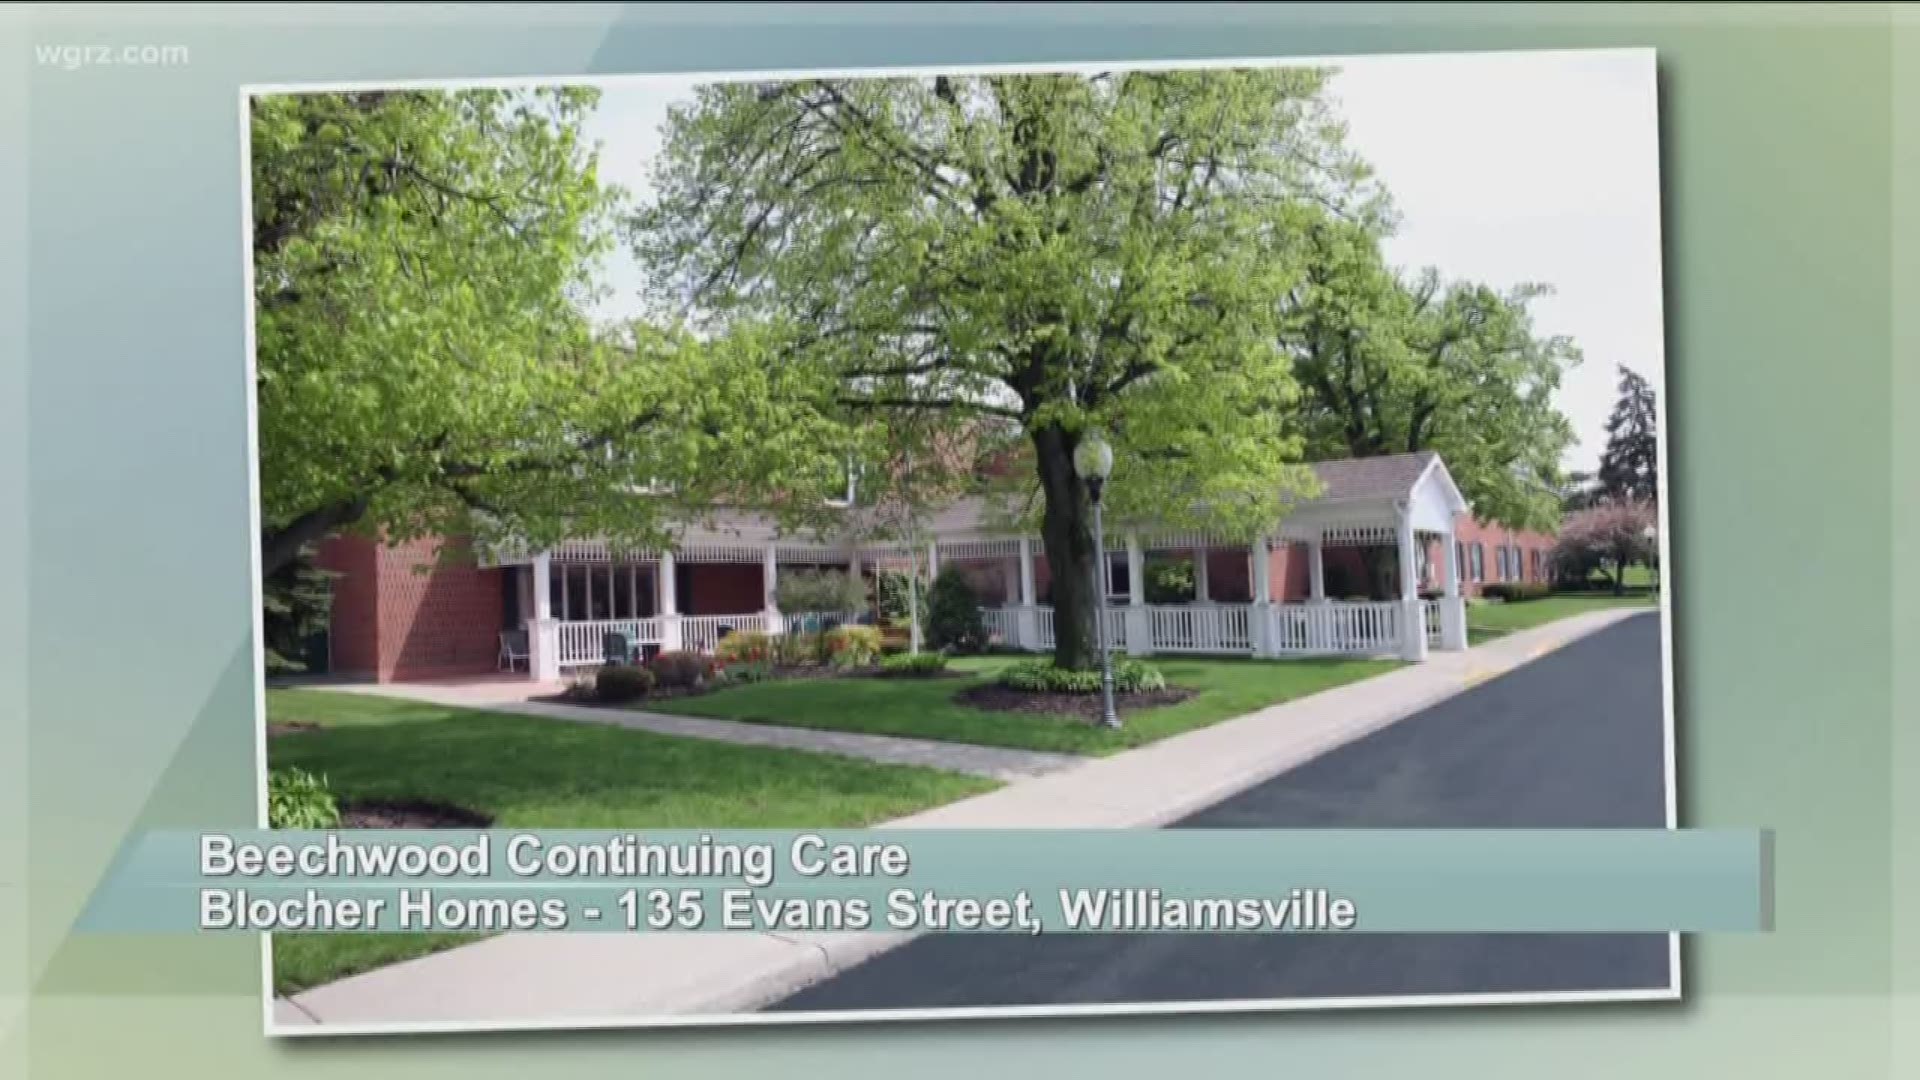 WNY Living - March 23 - Beechwood Continuing Care (SPONSORED CONTENT)